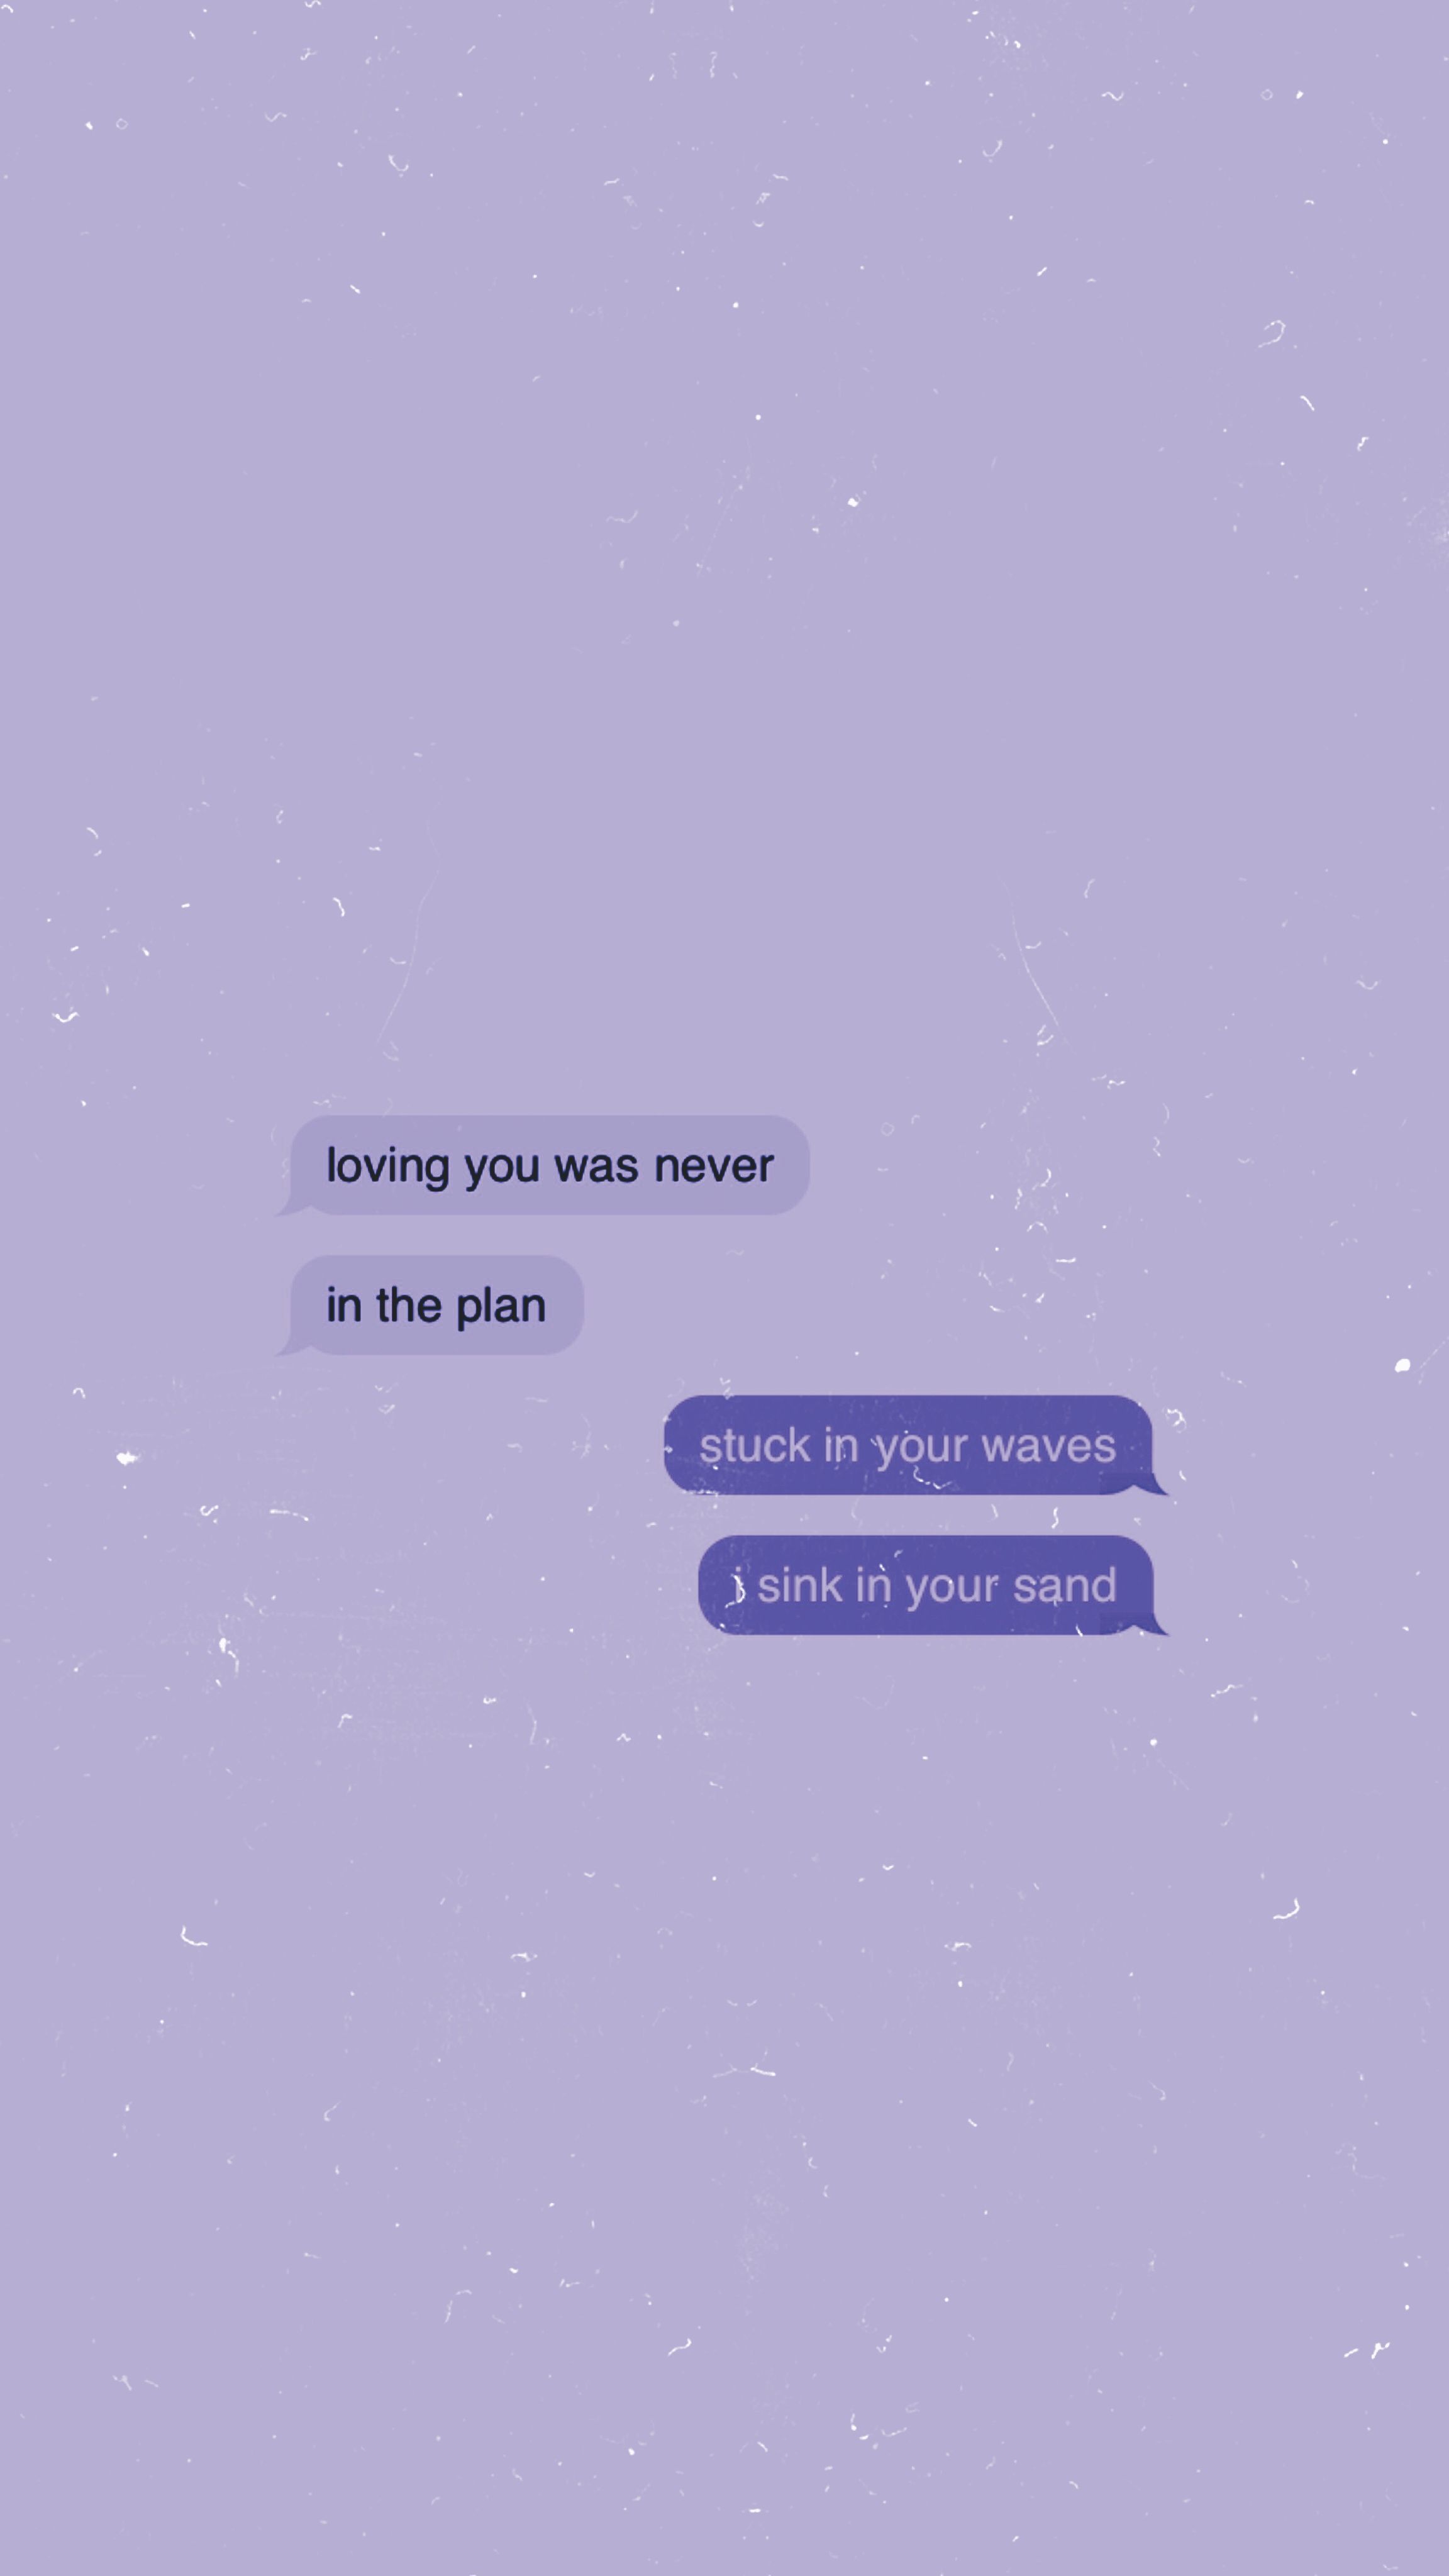 why don't plan X falling lyrics. Funny text messages, Sweet text messages, Love quotes